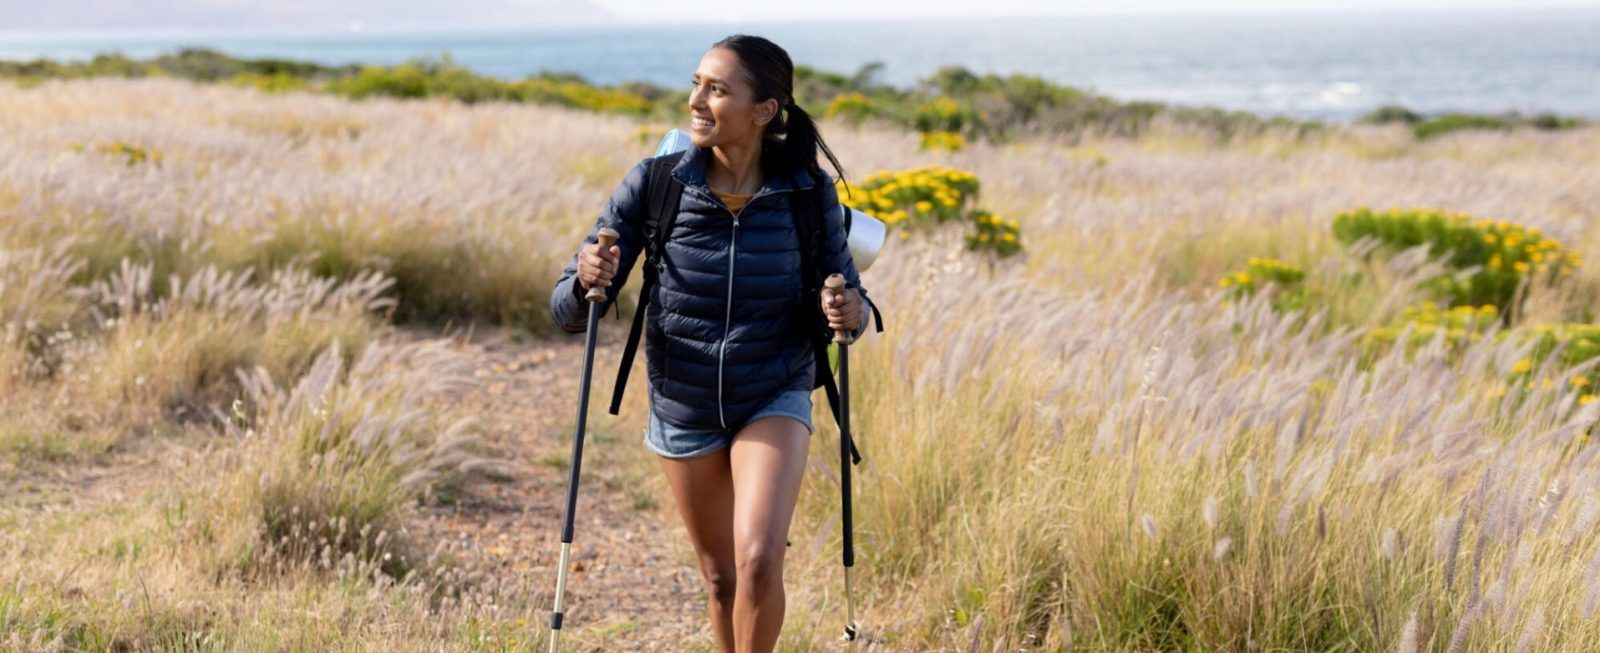 Nordic walking can help improve heart health—here’s how to do it